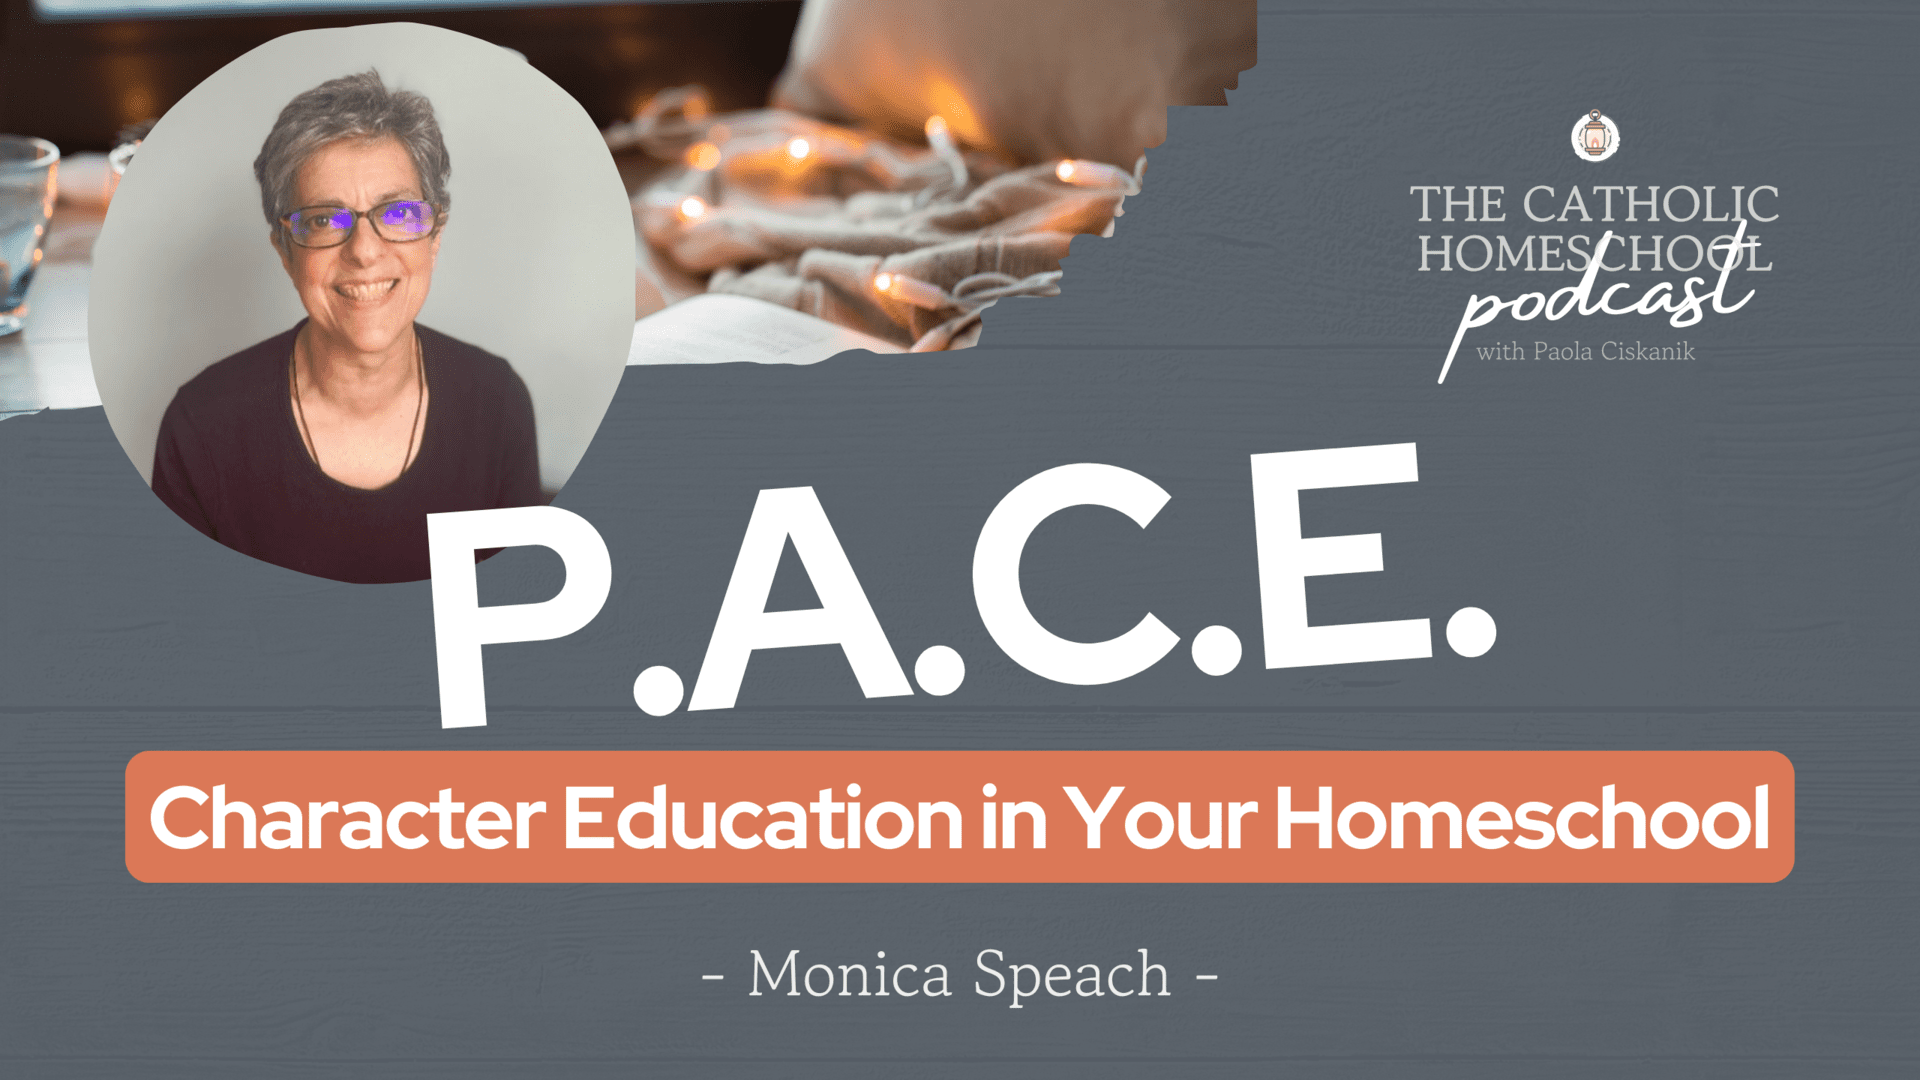 Monica Speach | PACE: Character Education in Your Homeschool | The Catholic Homeschool Podcast